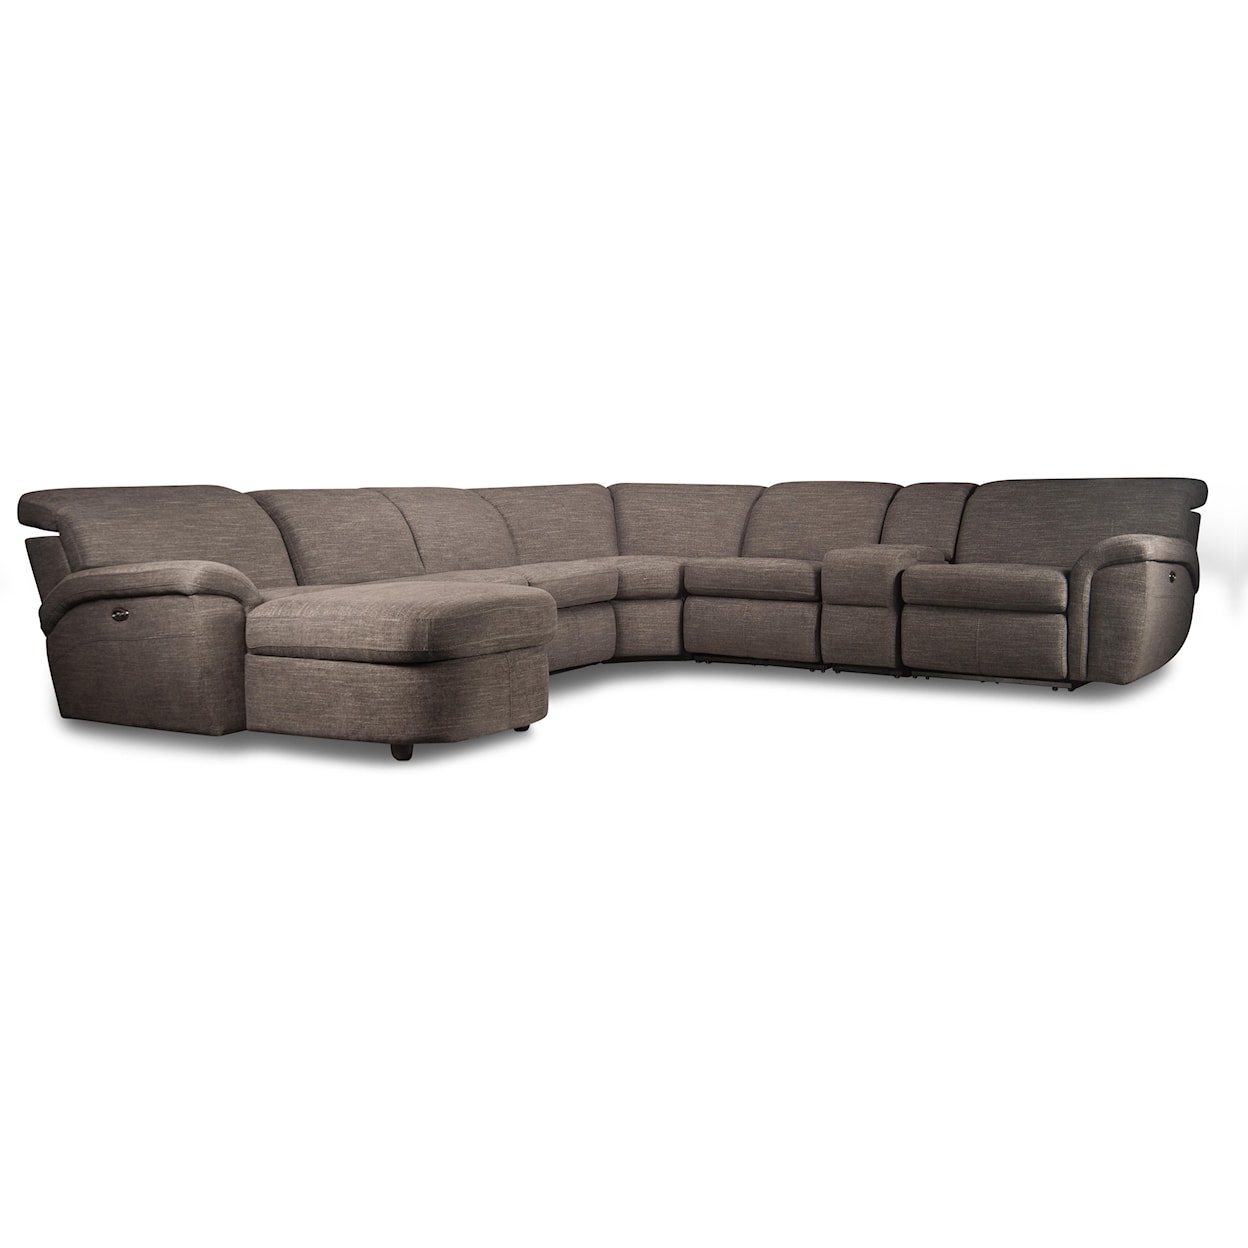 Vogue Home Furnishings Astra Astra Sleeper Sectional with Power Recliner